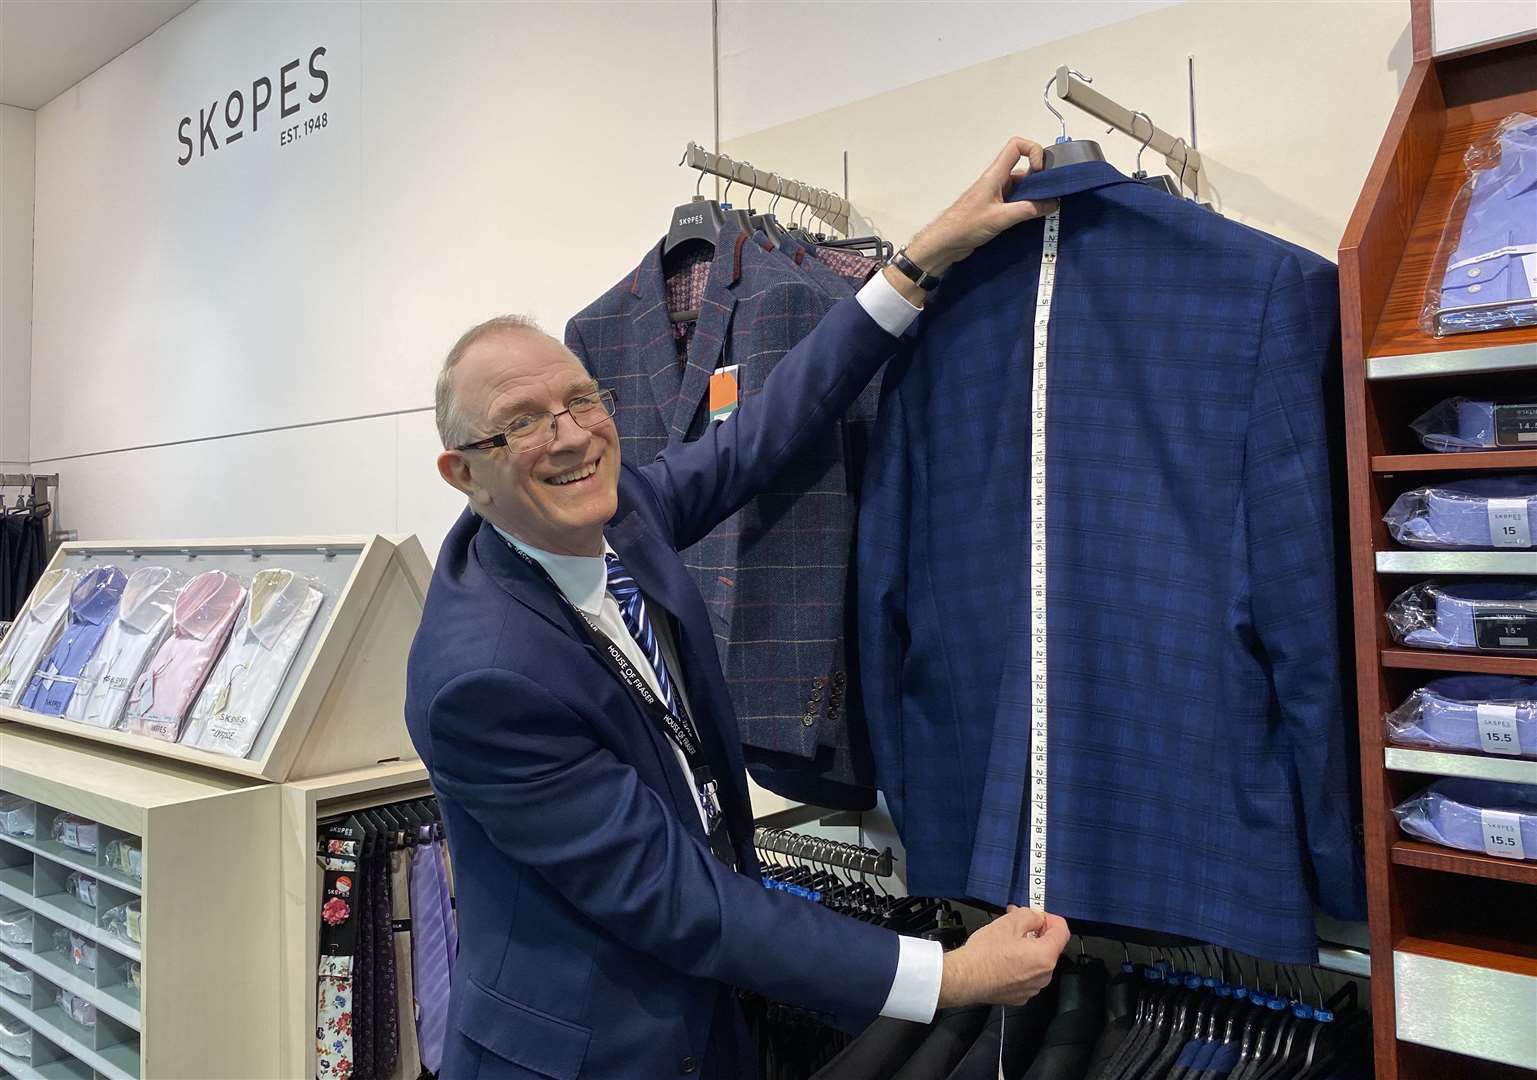 Ron Kinslow, 68, has been working as a tailor in Maidstone for over 50 years